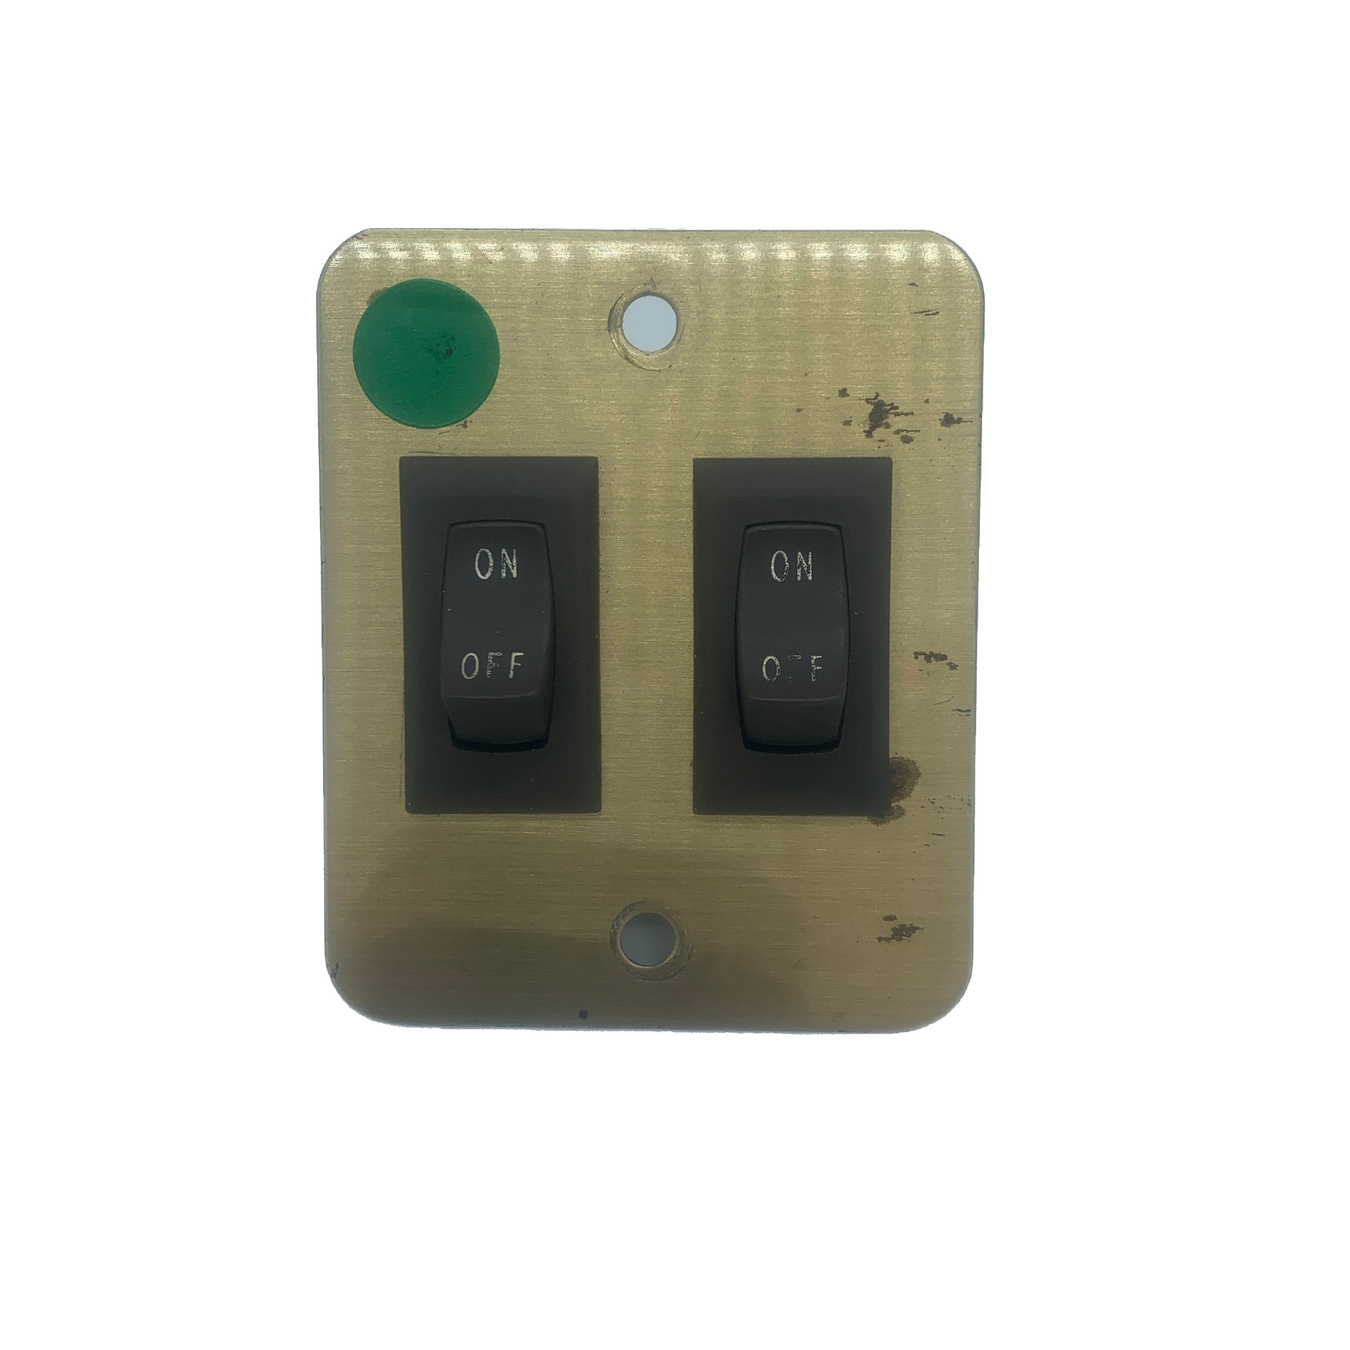 Used RV Light Switches